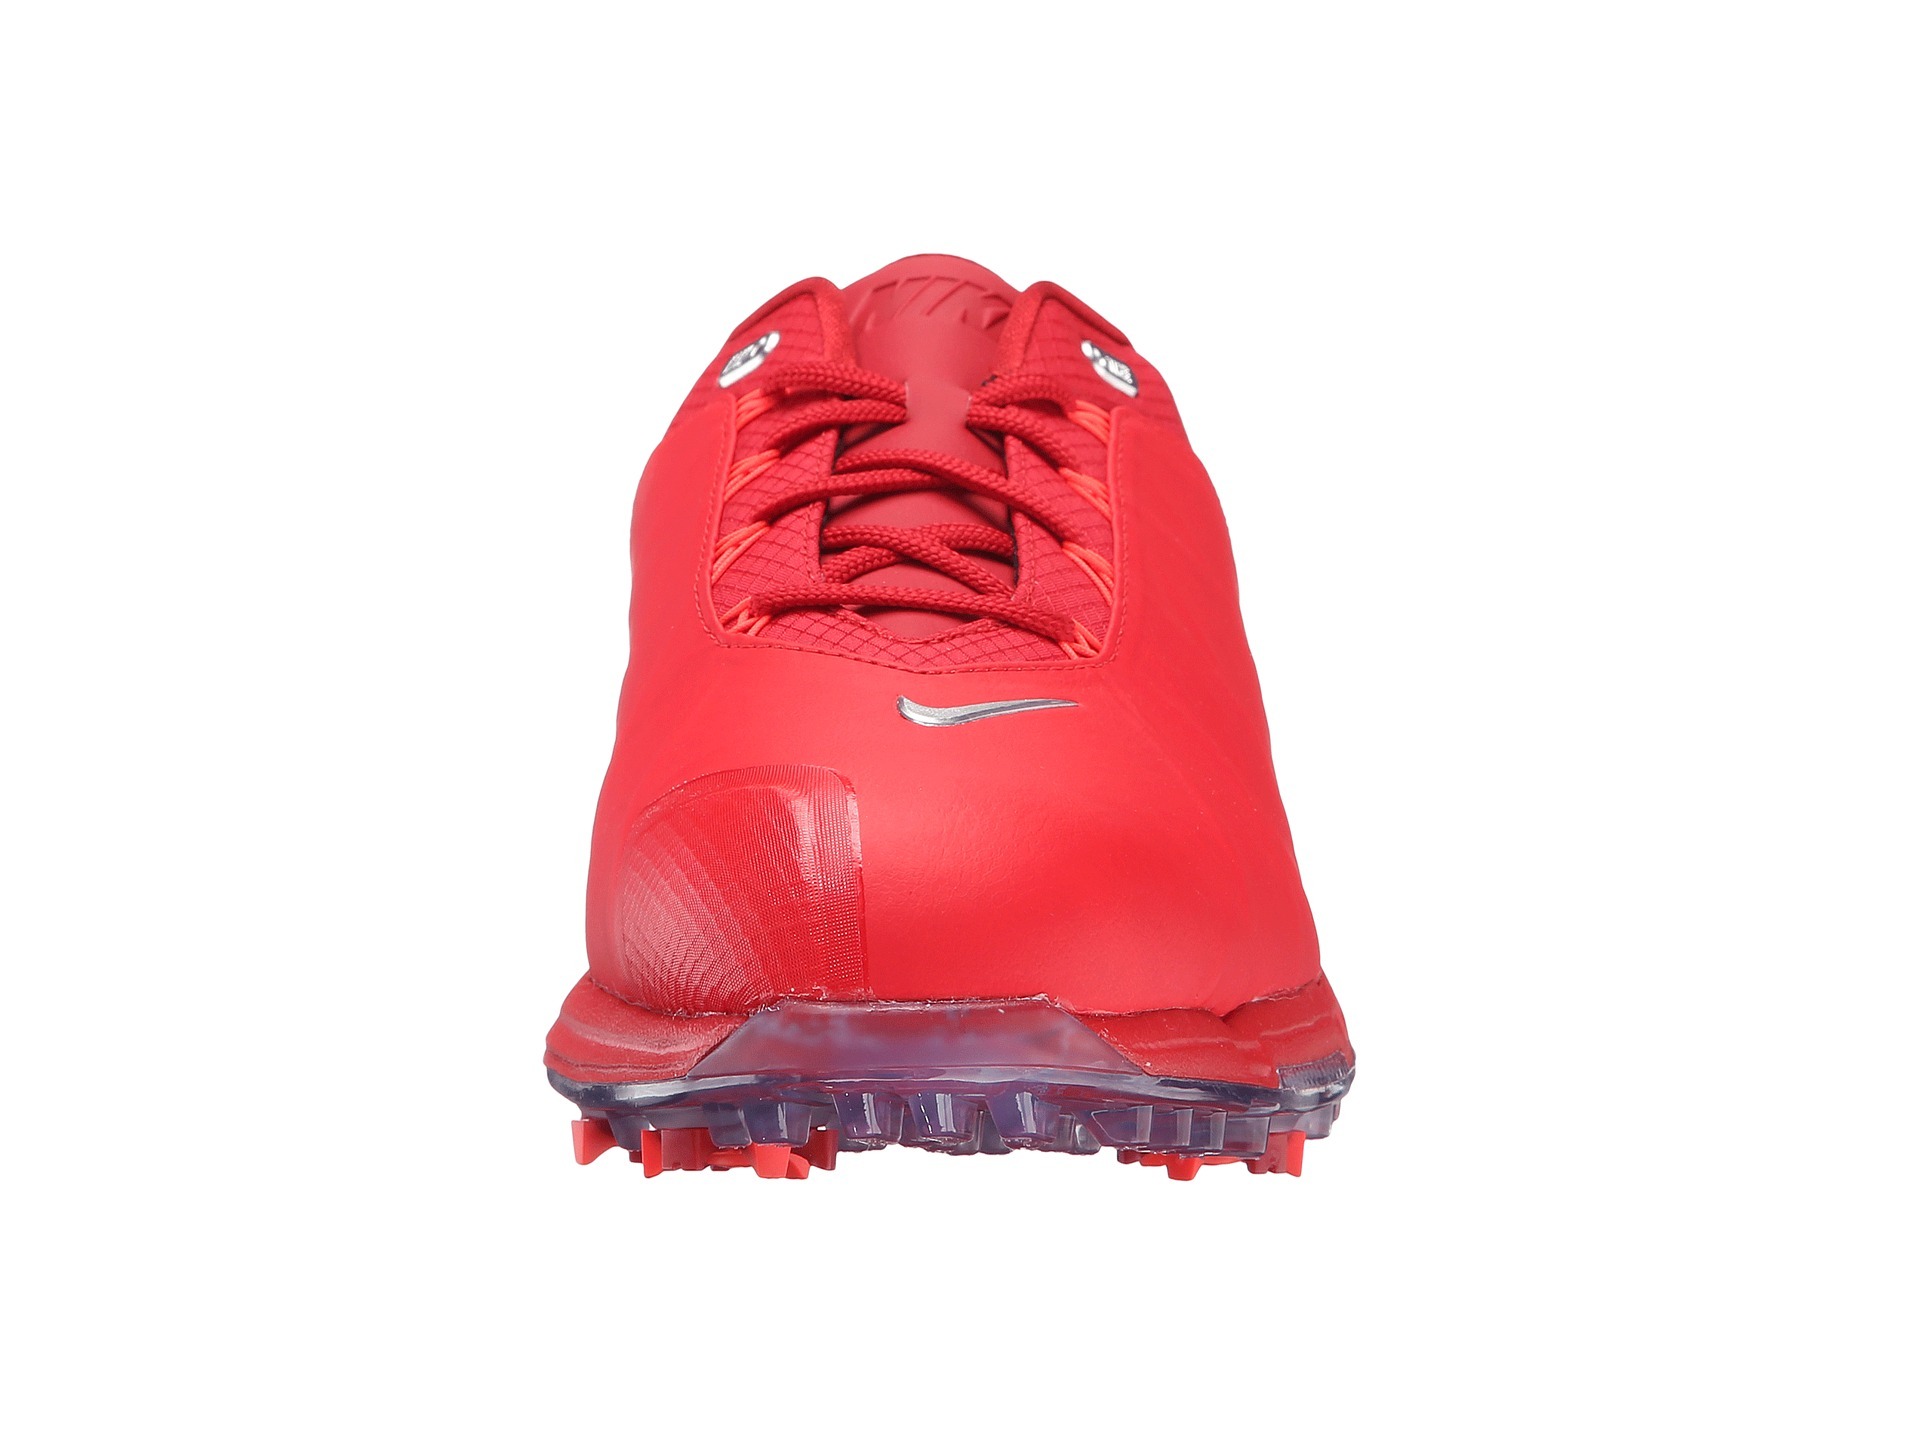 nike lunar fire golf shoes red